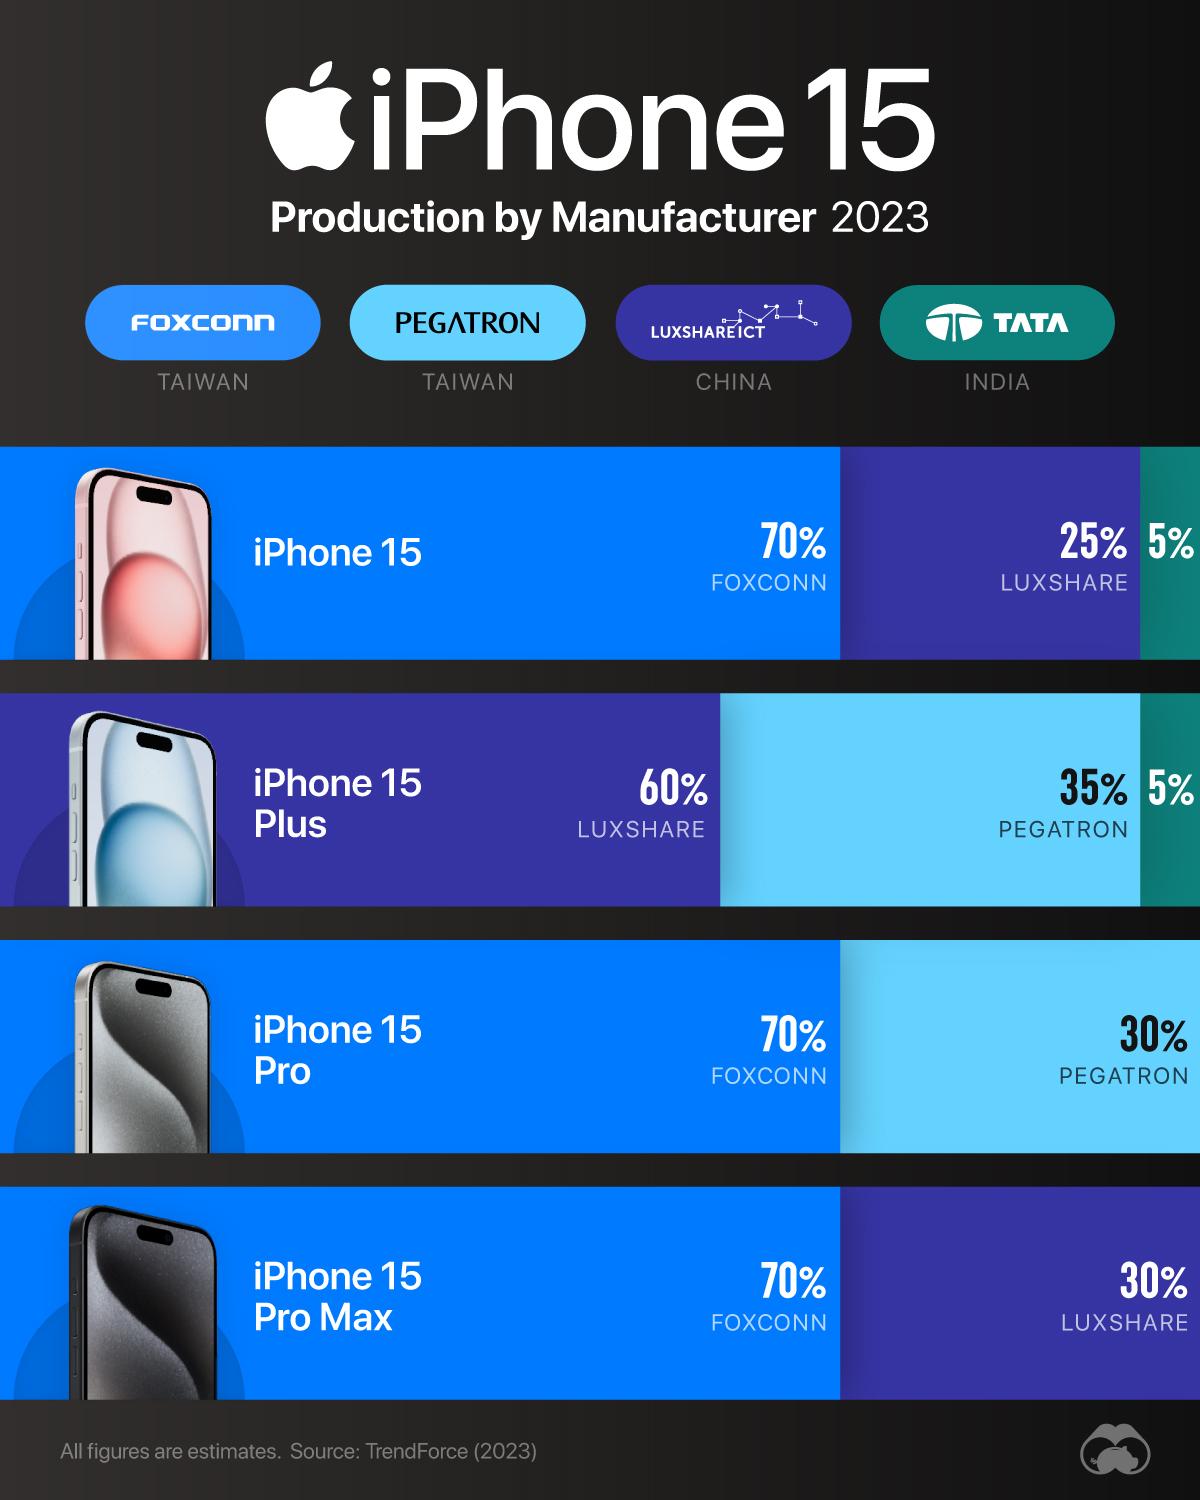 Who Makes the iPhone 15?